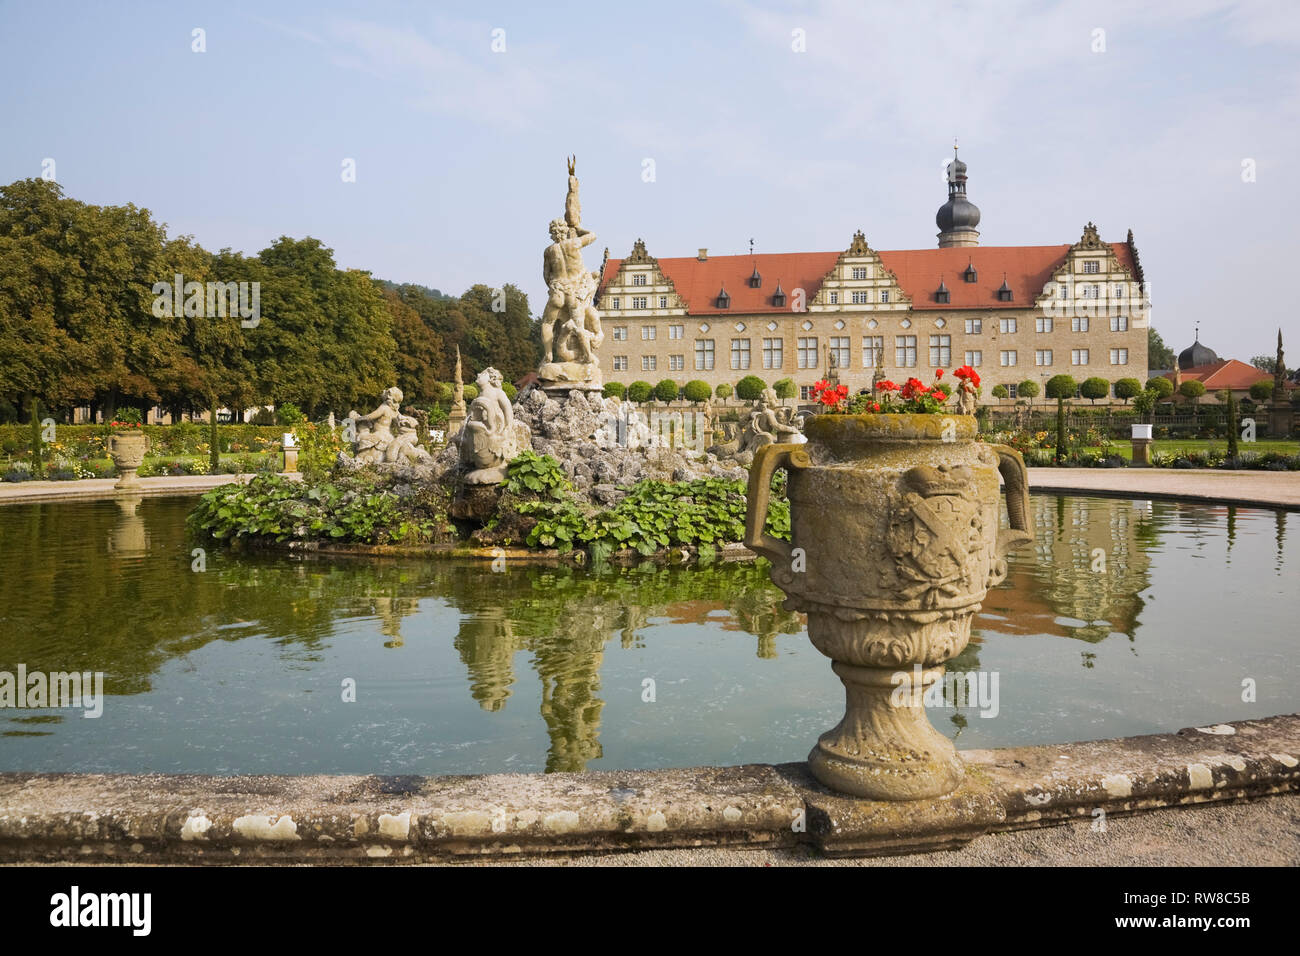 Red Geranium flowers in planter and water fountain pool with statue at the Weikersheim Palace garden in late summer, Hohenlohe region, Germany Stock Photo